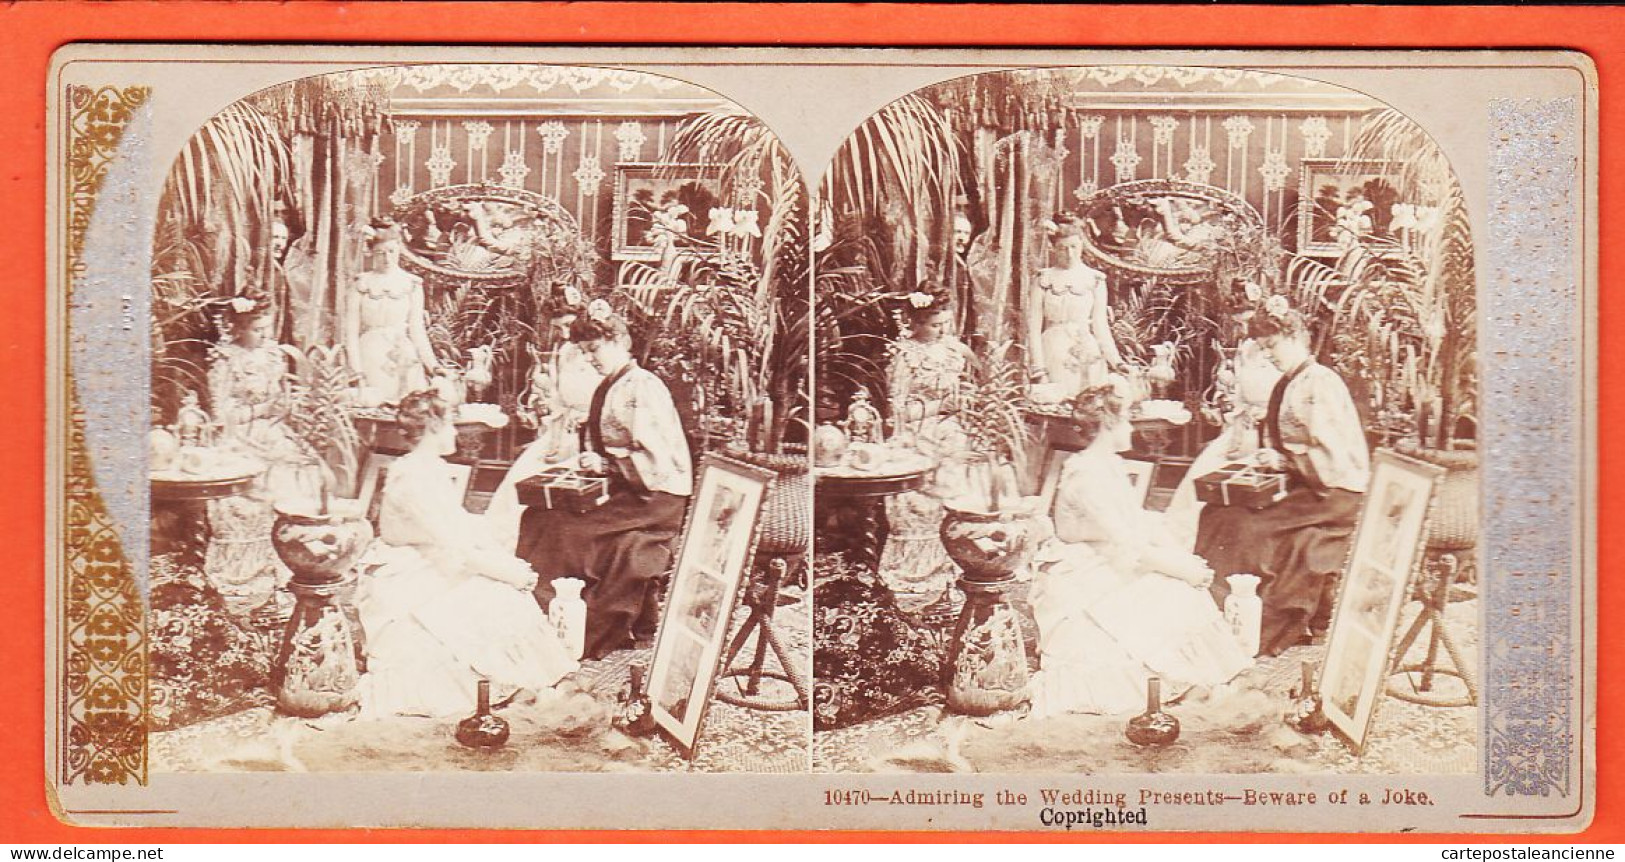 04569 / Admiring The Wedding Presents Beware Of A Joke 1- Mefiez Vous Cadeaux Mariage Blague 1890s Stereo-Views  N°10470 - Stereo-Photographie